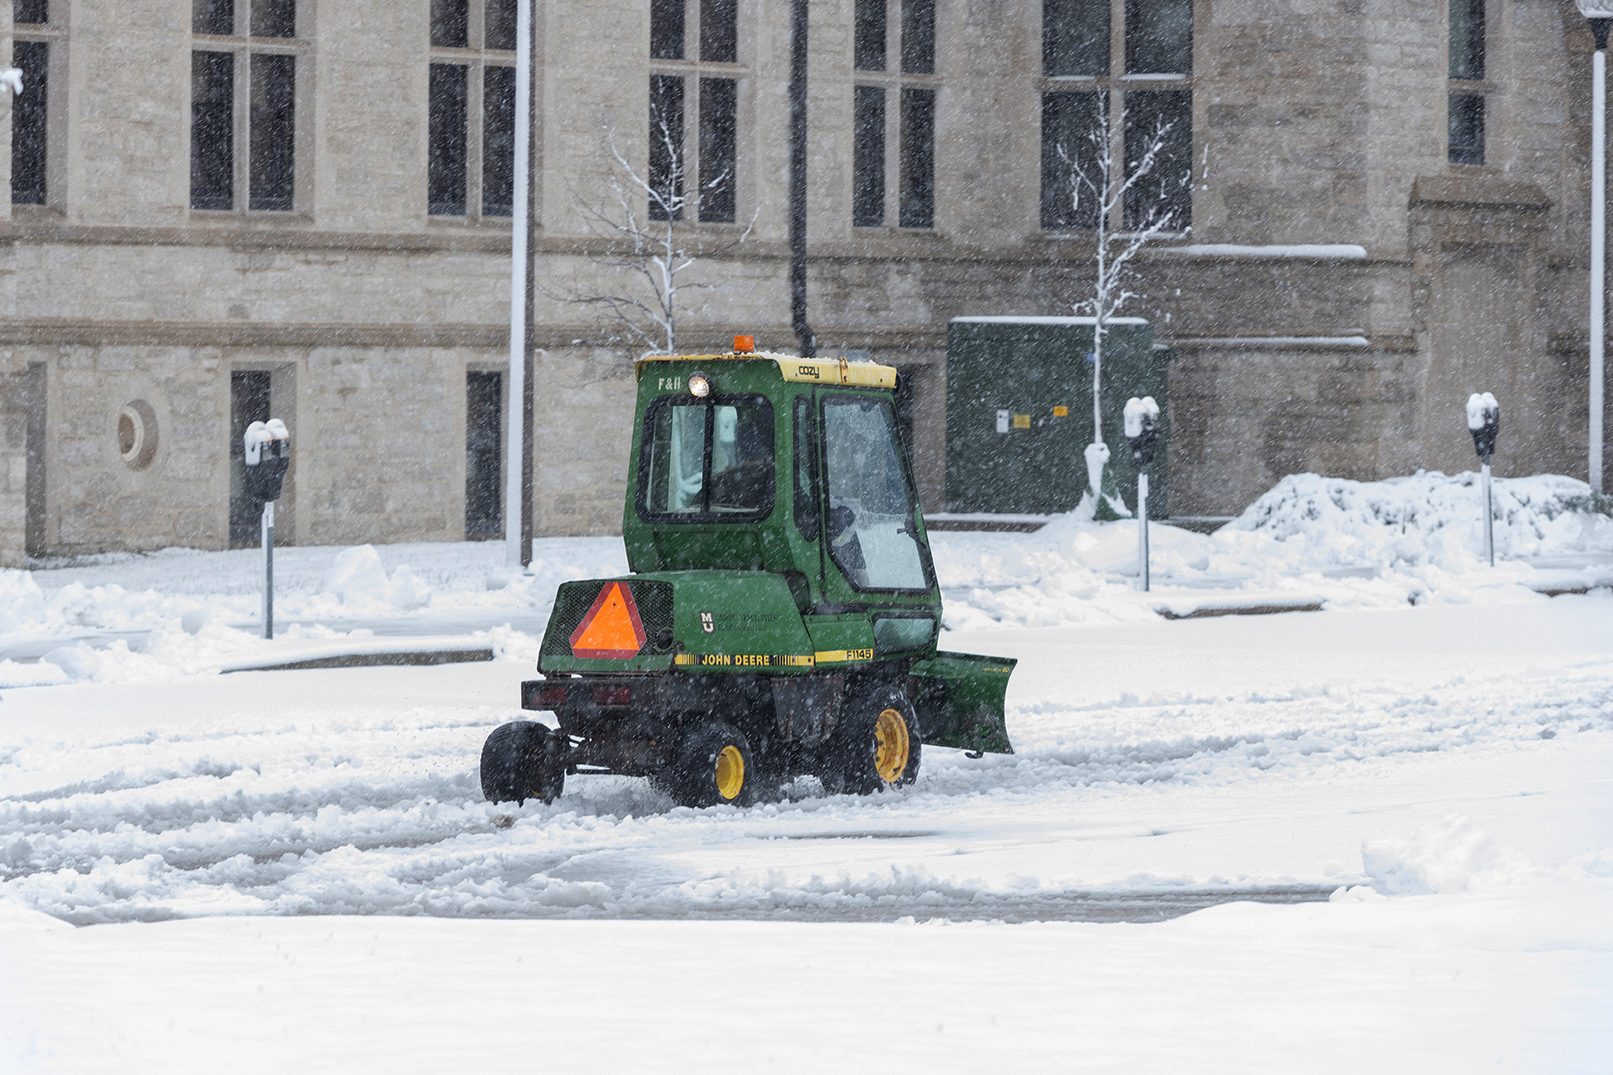 a landscape services vehicle helps clear snow from a sidewalk